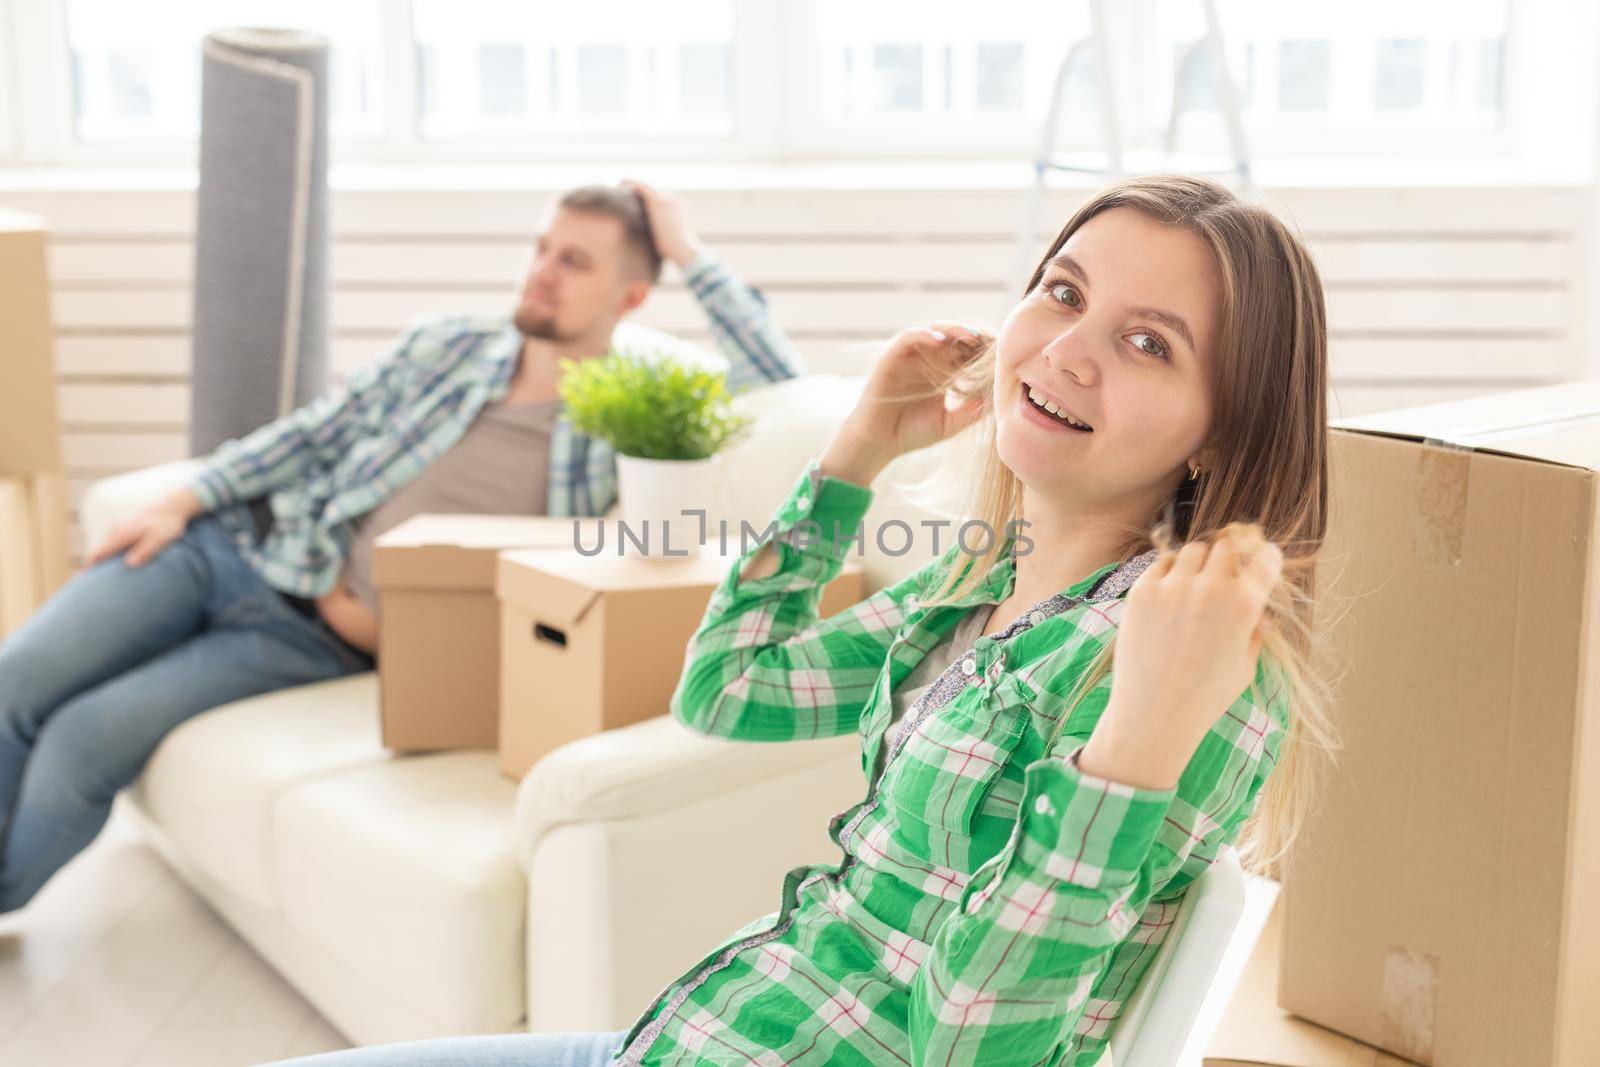 Positive smiling young girl sitting against her laughing blurred husband in a new living room while moving to a new home. The concept of joy from the possibility of finding new housing